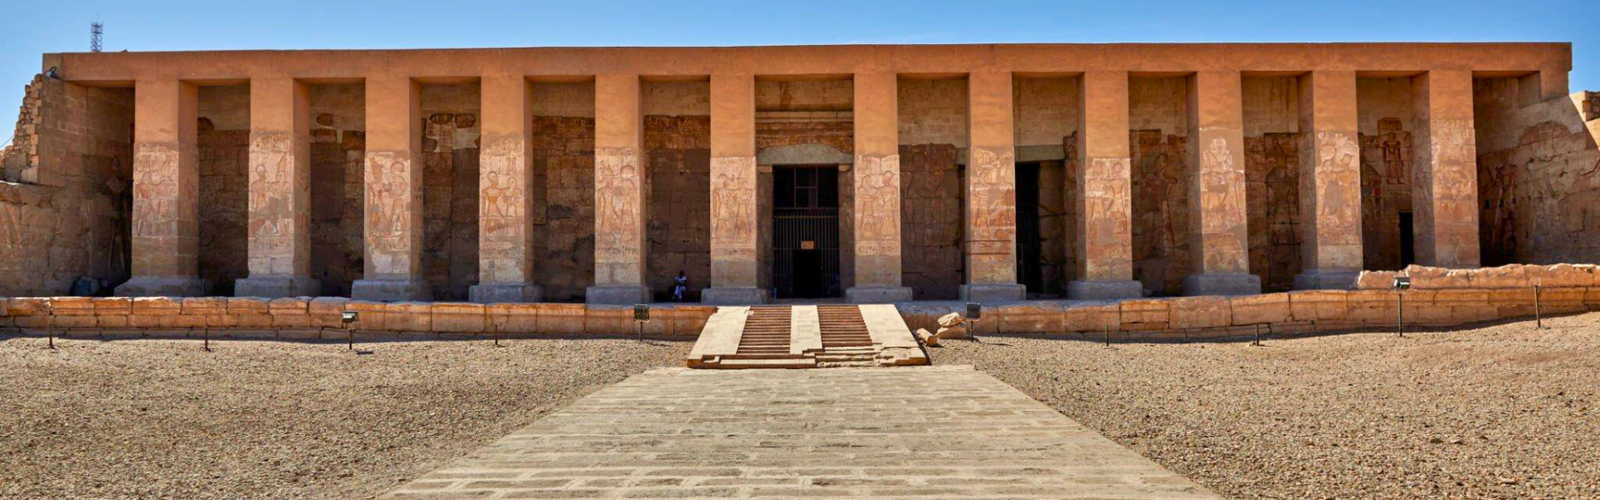 The Temple of Abydos in Luxor, Egypt